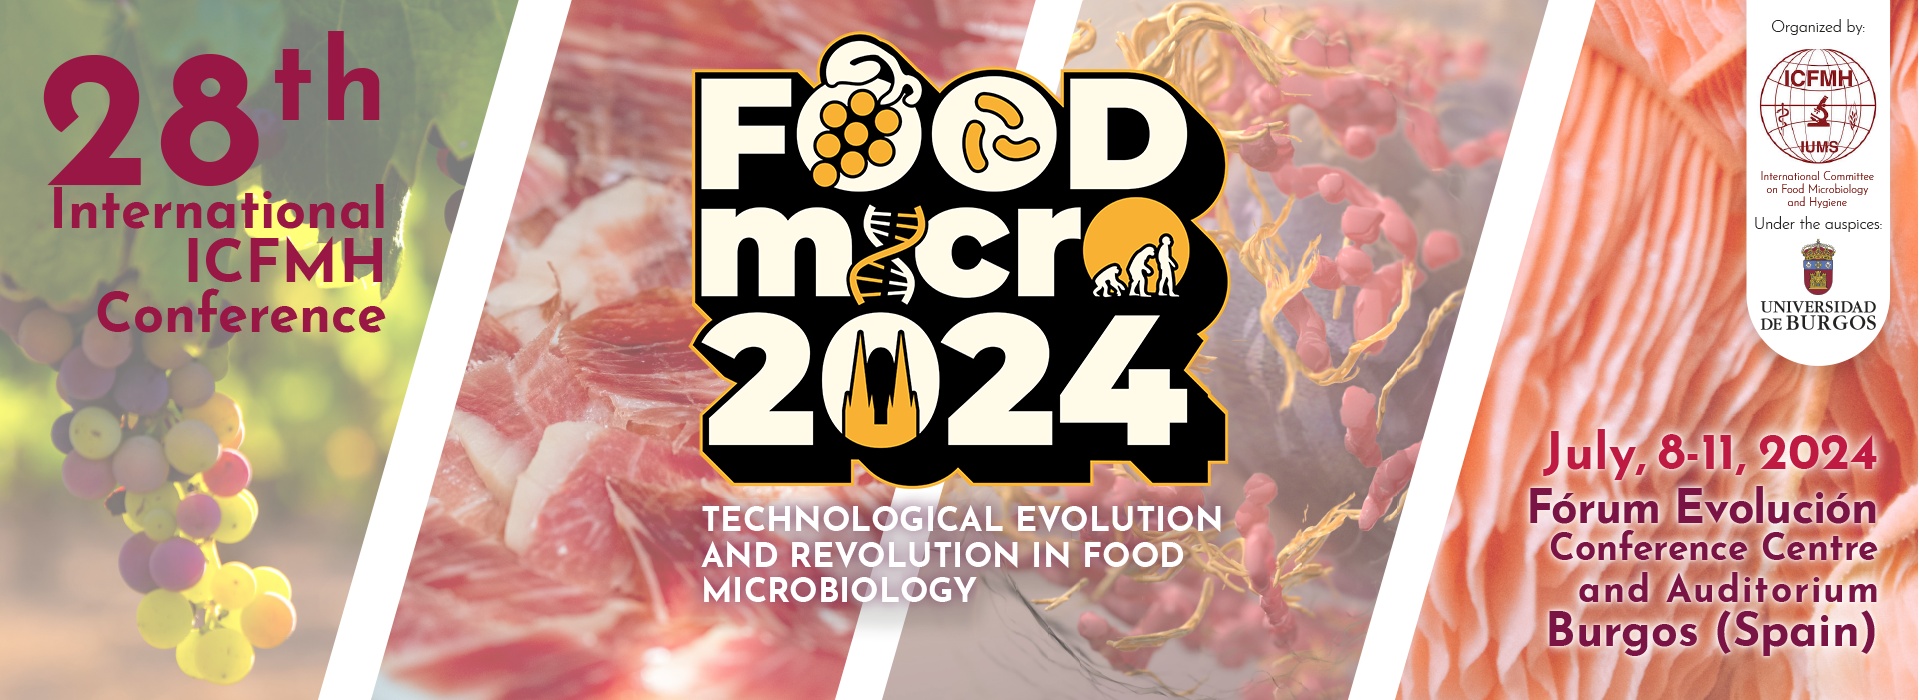 28th International ICFMH Conference FOOD MICRO 2024